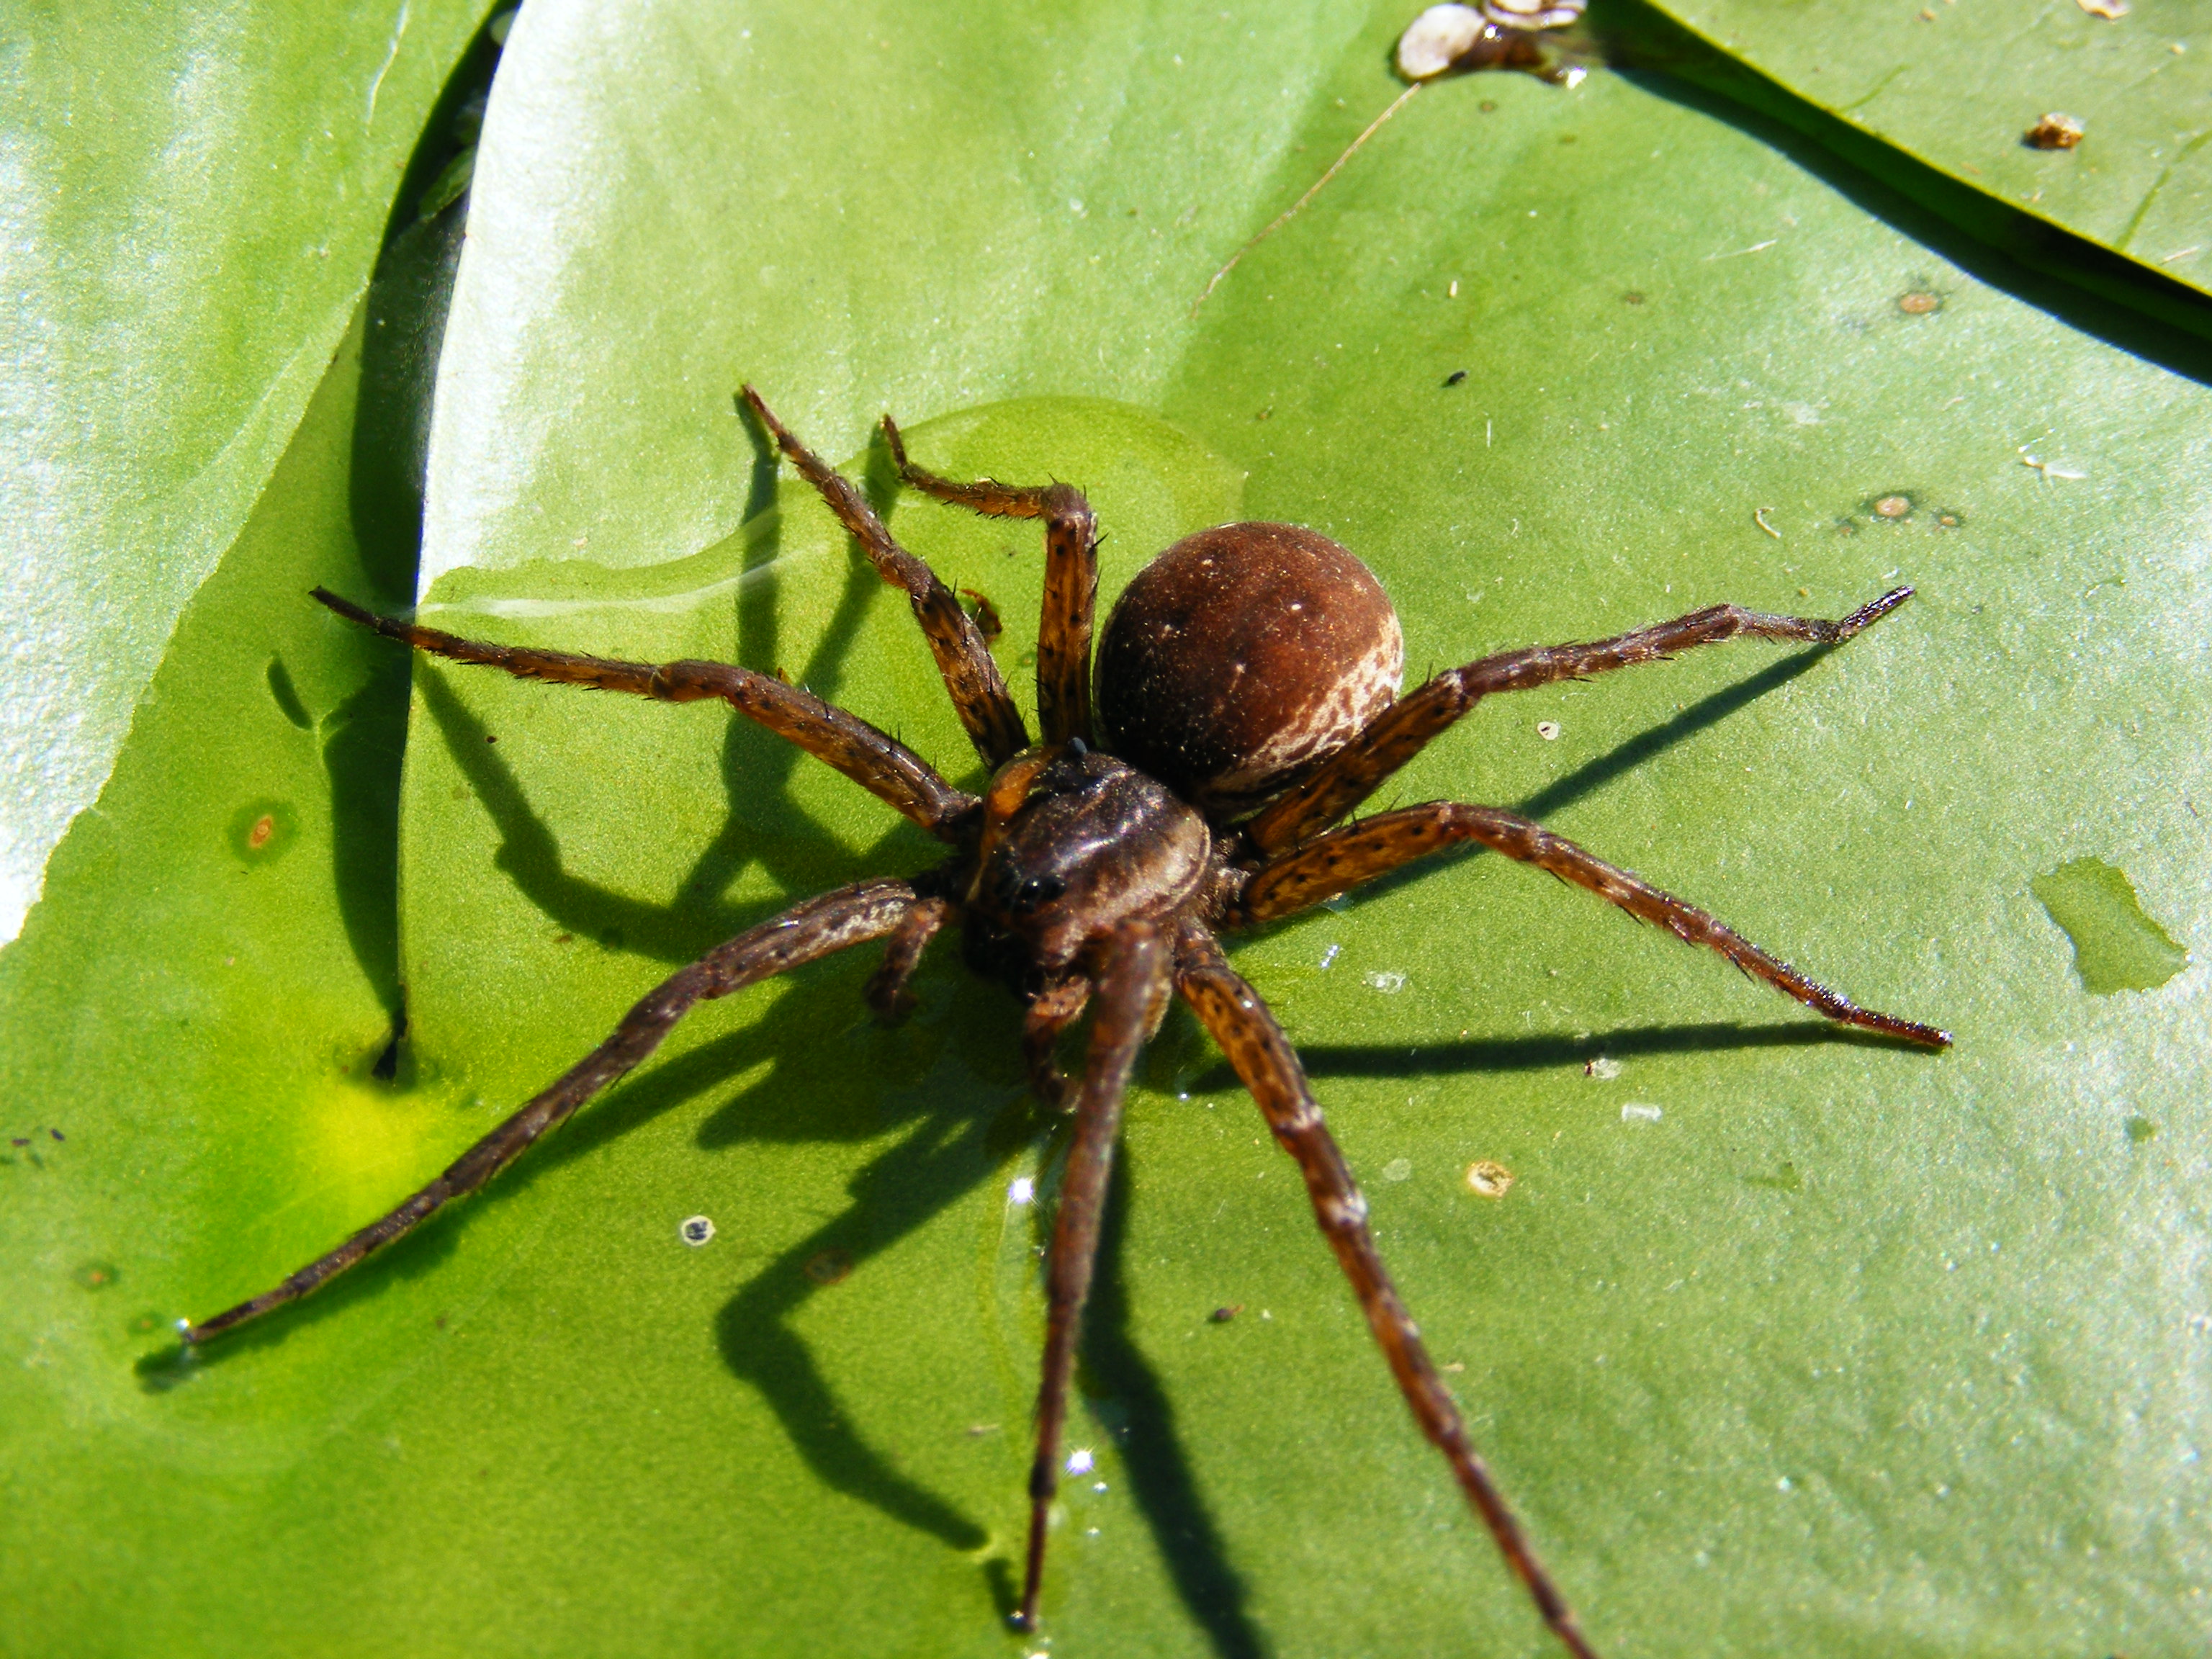 File:Spider on the yellow pond-lily leaf.JPG - Wikimedia Commons